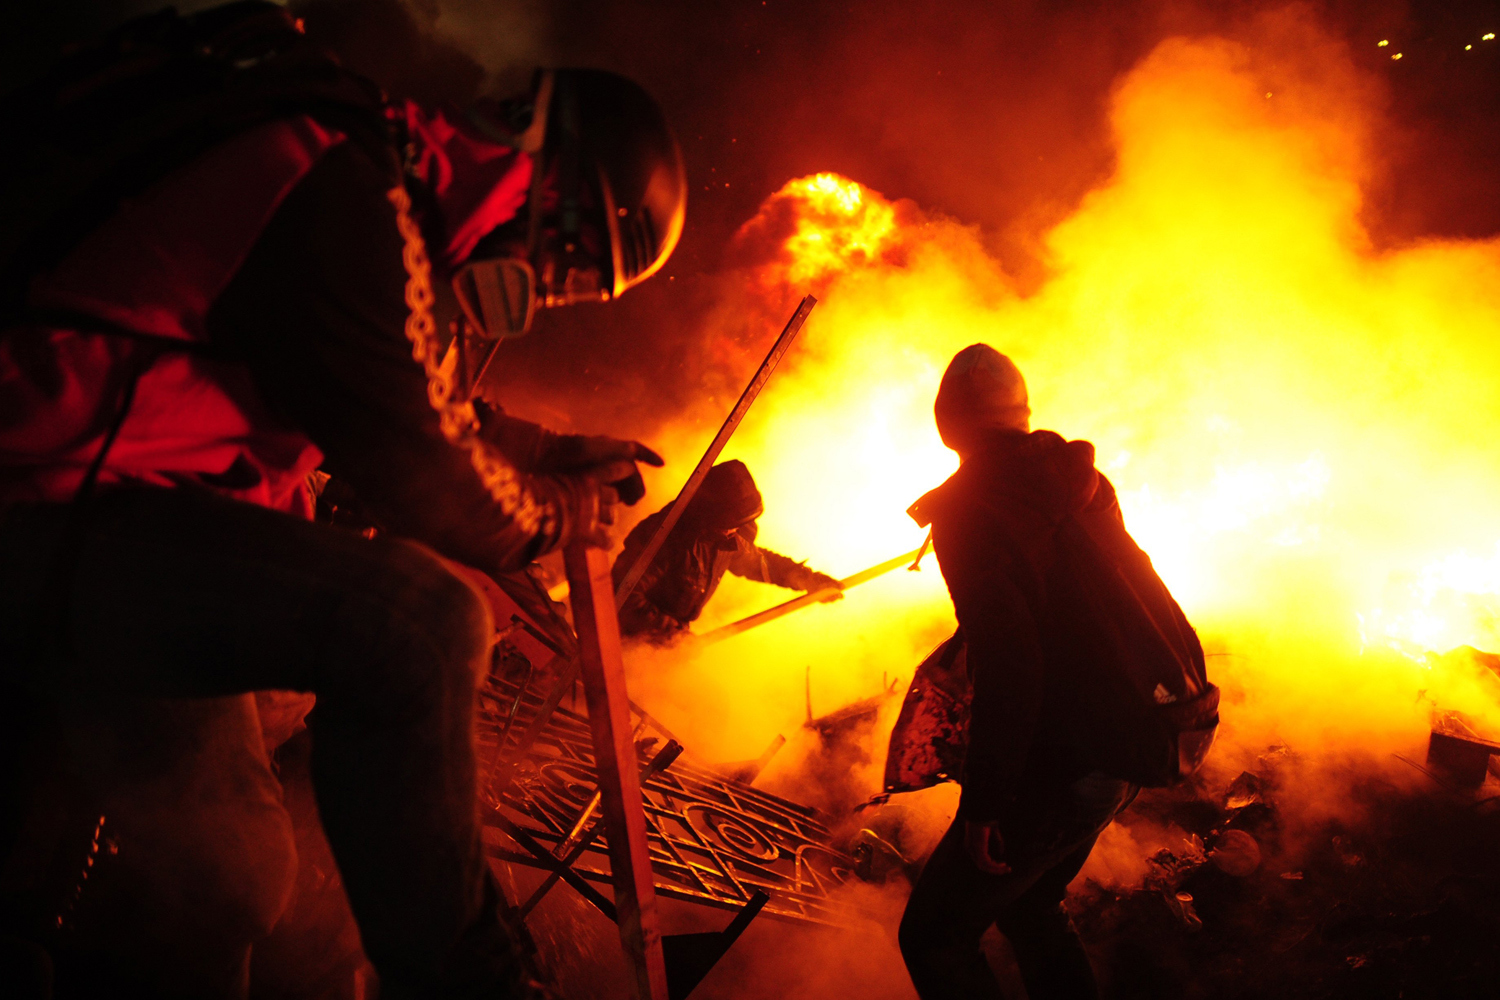 Anti-government protesters clash with police on Independence Square in Kiev on Feb. 19, 2014.